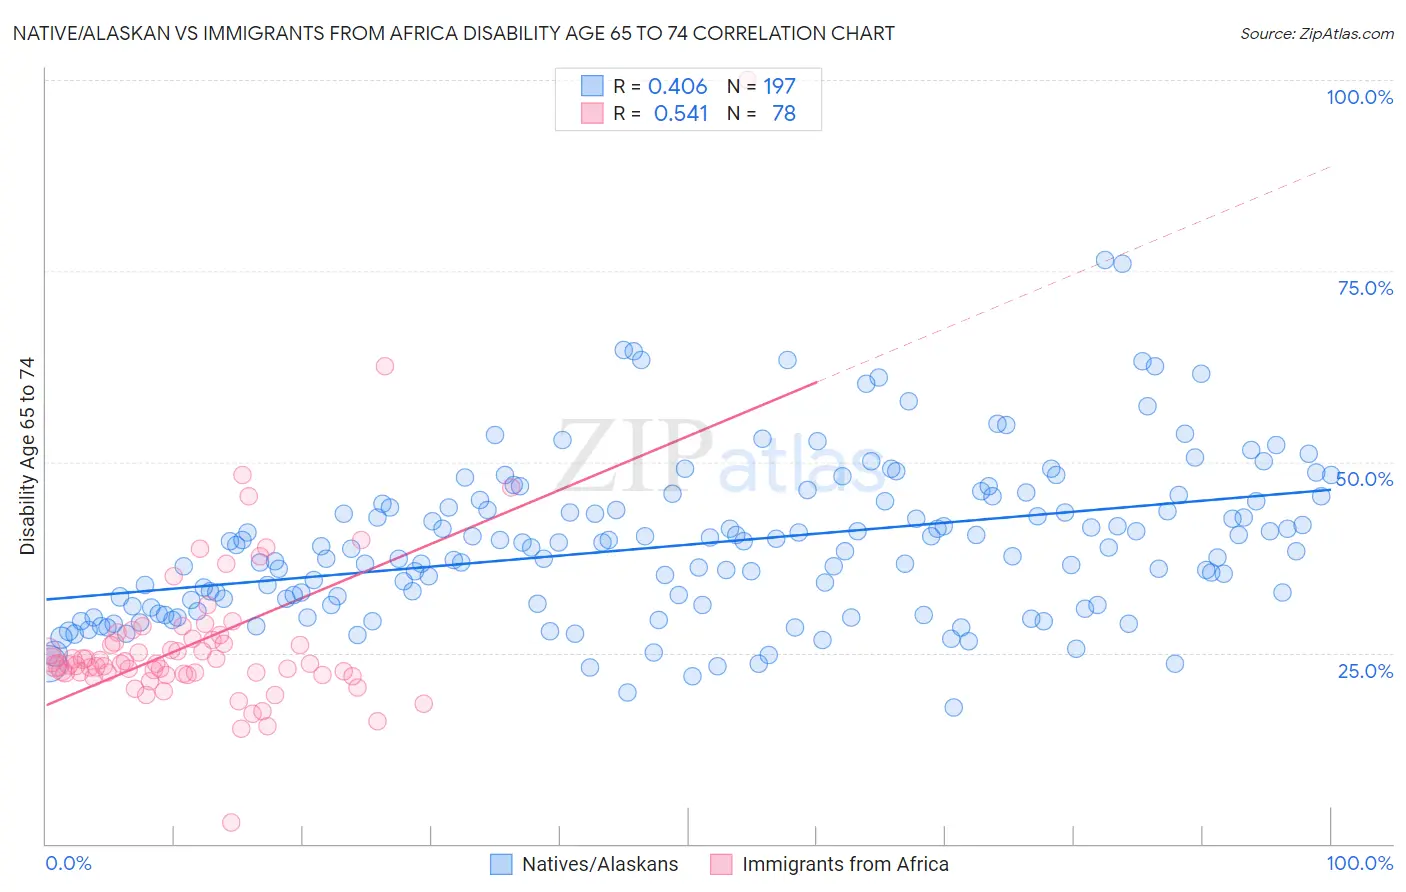 Native/Alaskan vs Immigrants from Africa Disability Age 65 to 74